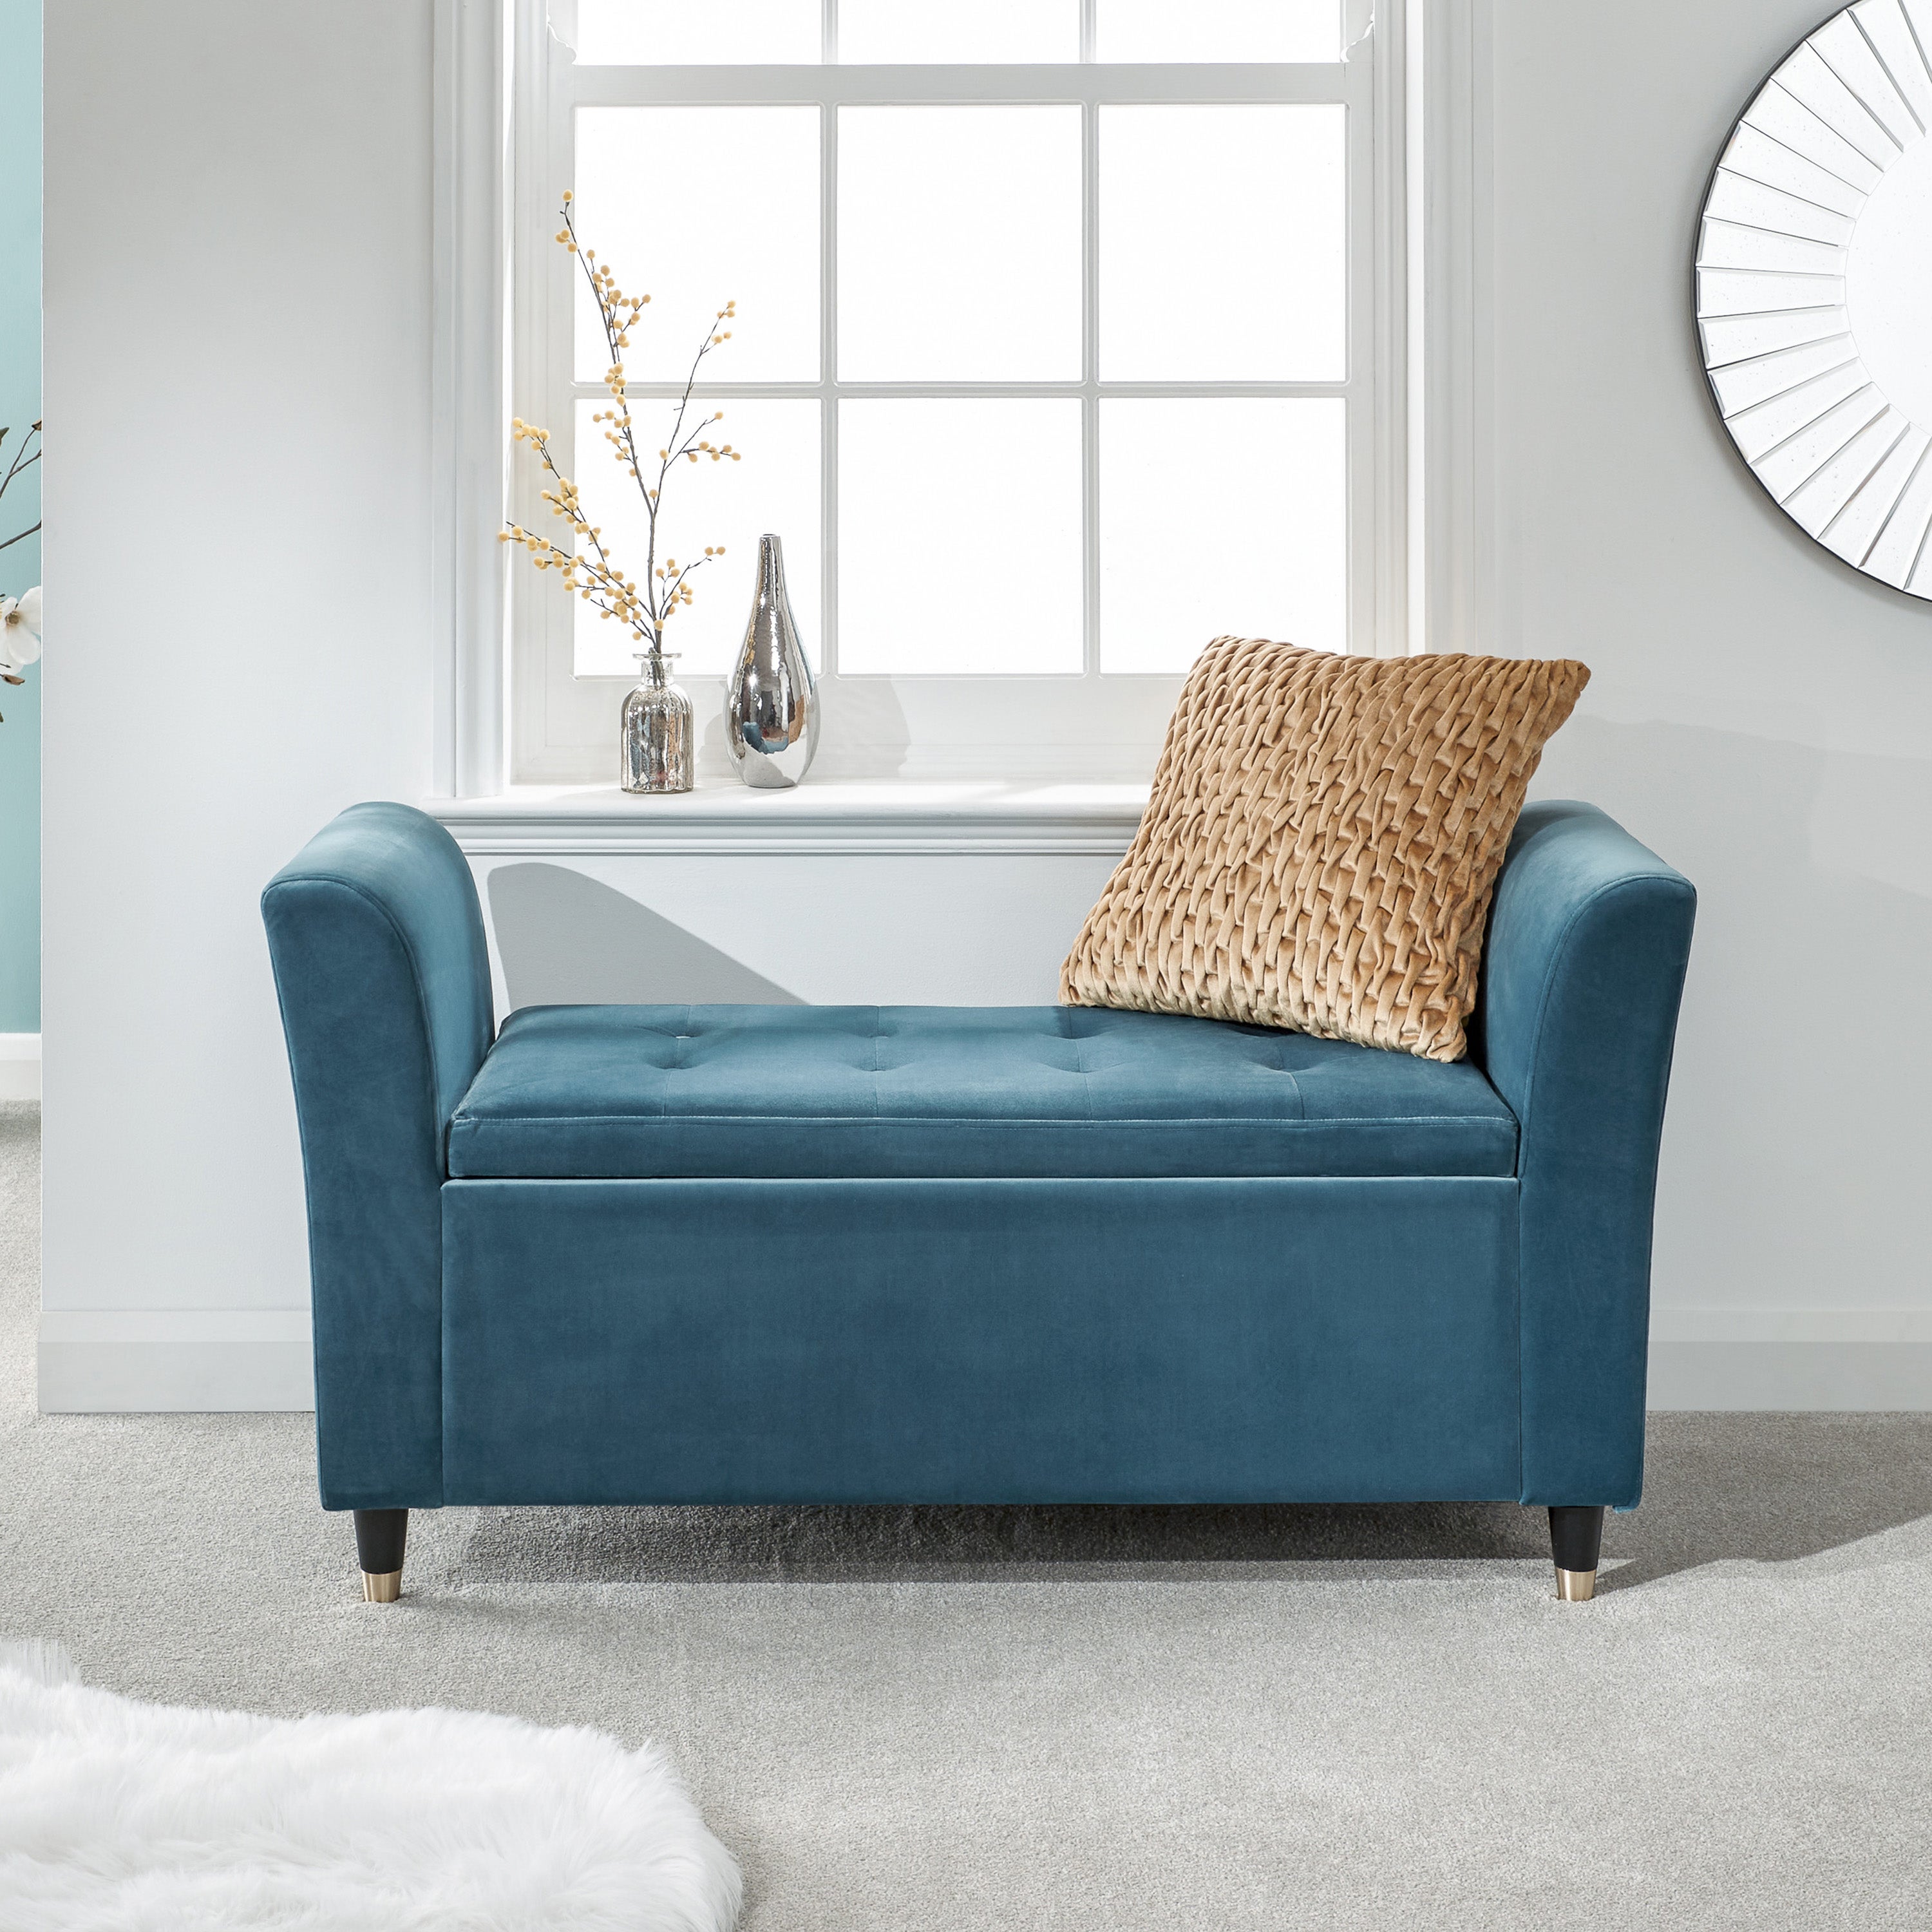 Photos - Dresser / Chests of Drawers Genoa Window Seat, Chenille Teal (Blue)